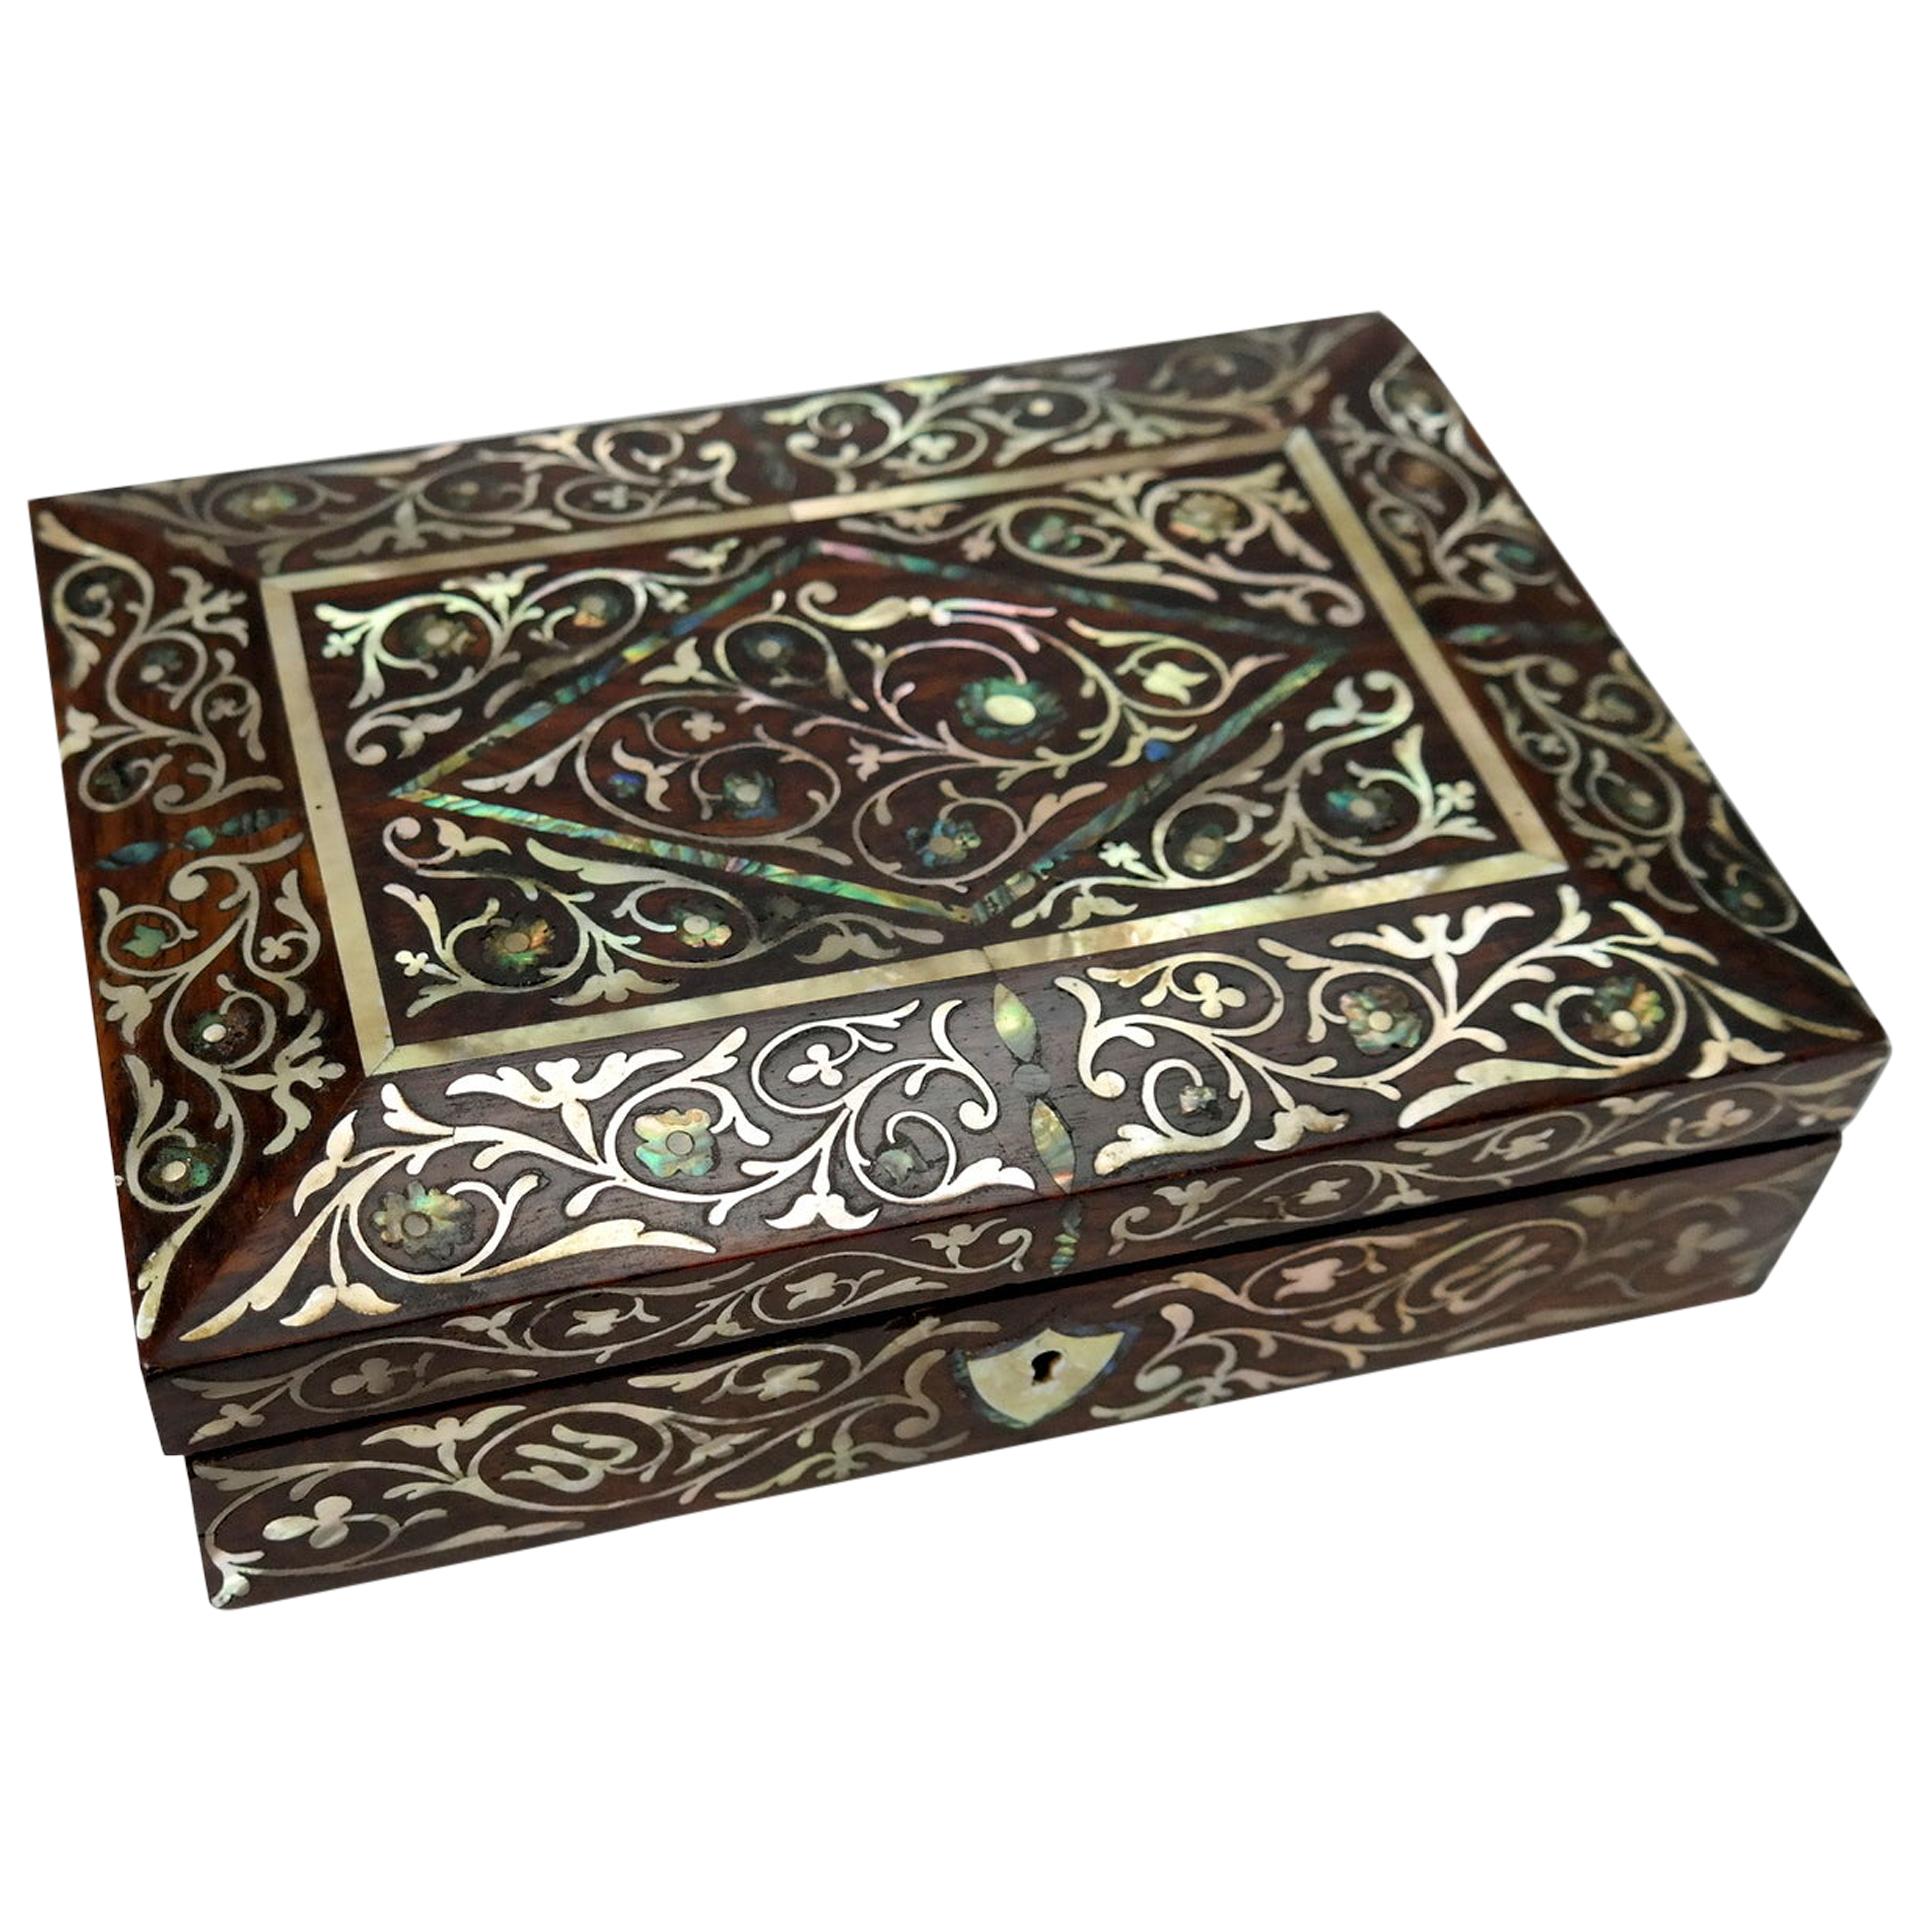 Wooden Jewelry/Trinket Box with Mother of Pearl Inlay, 19th Century